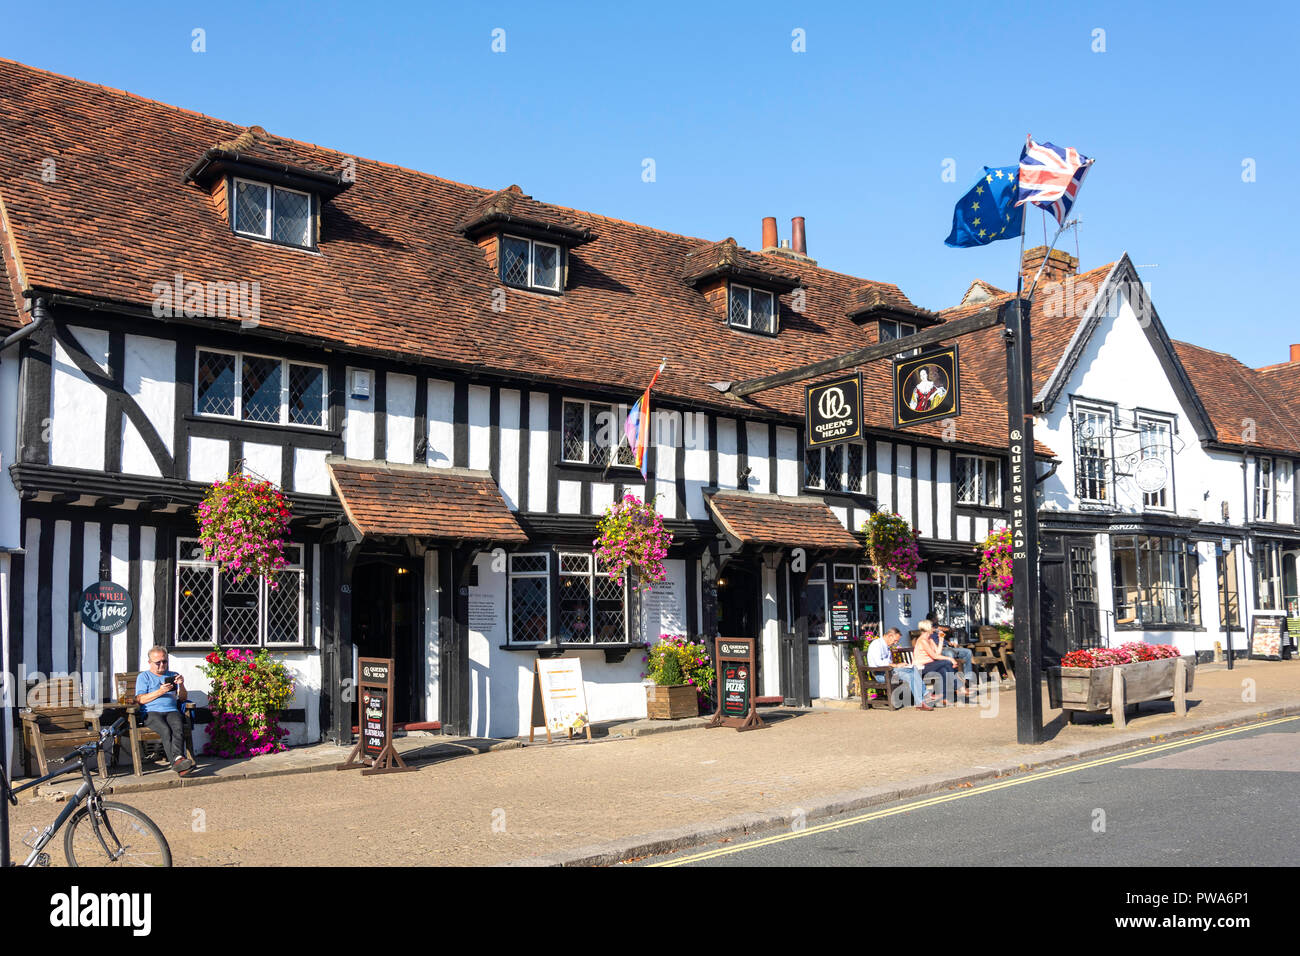 Pinner High Resolution Stock Photography and Images - Alamy